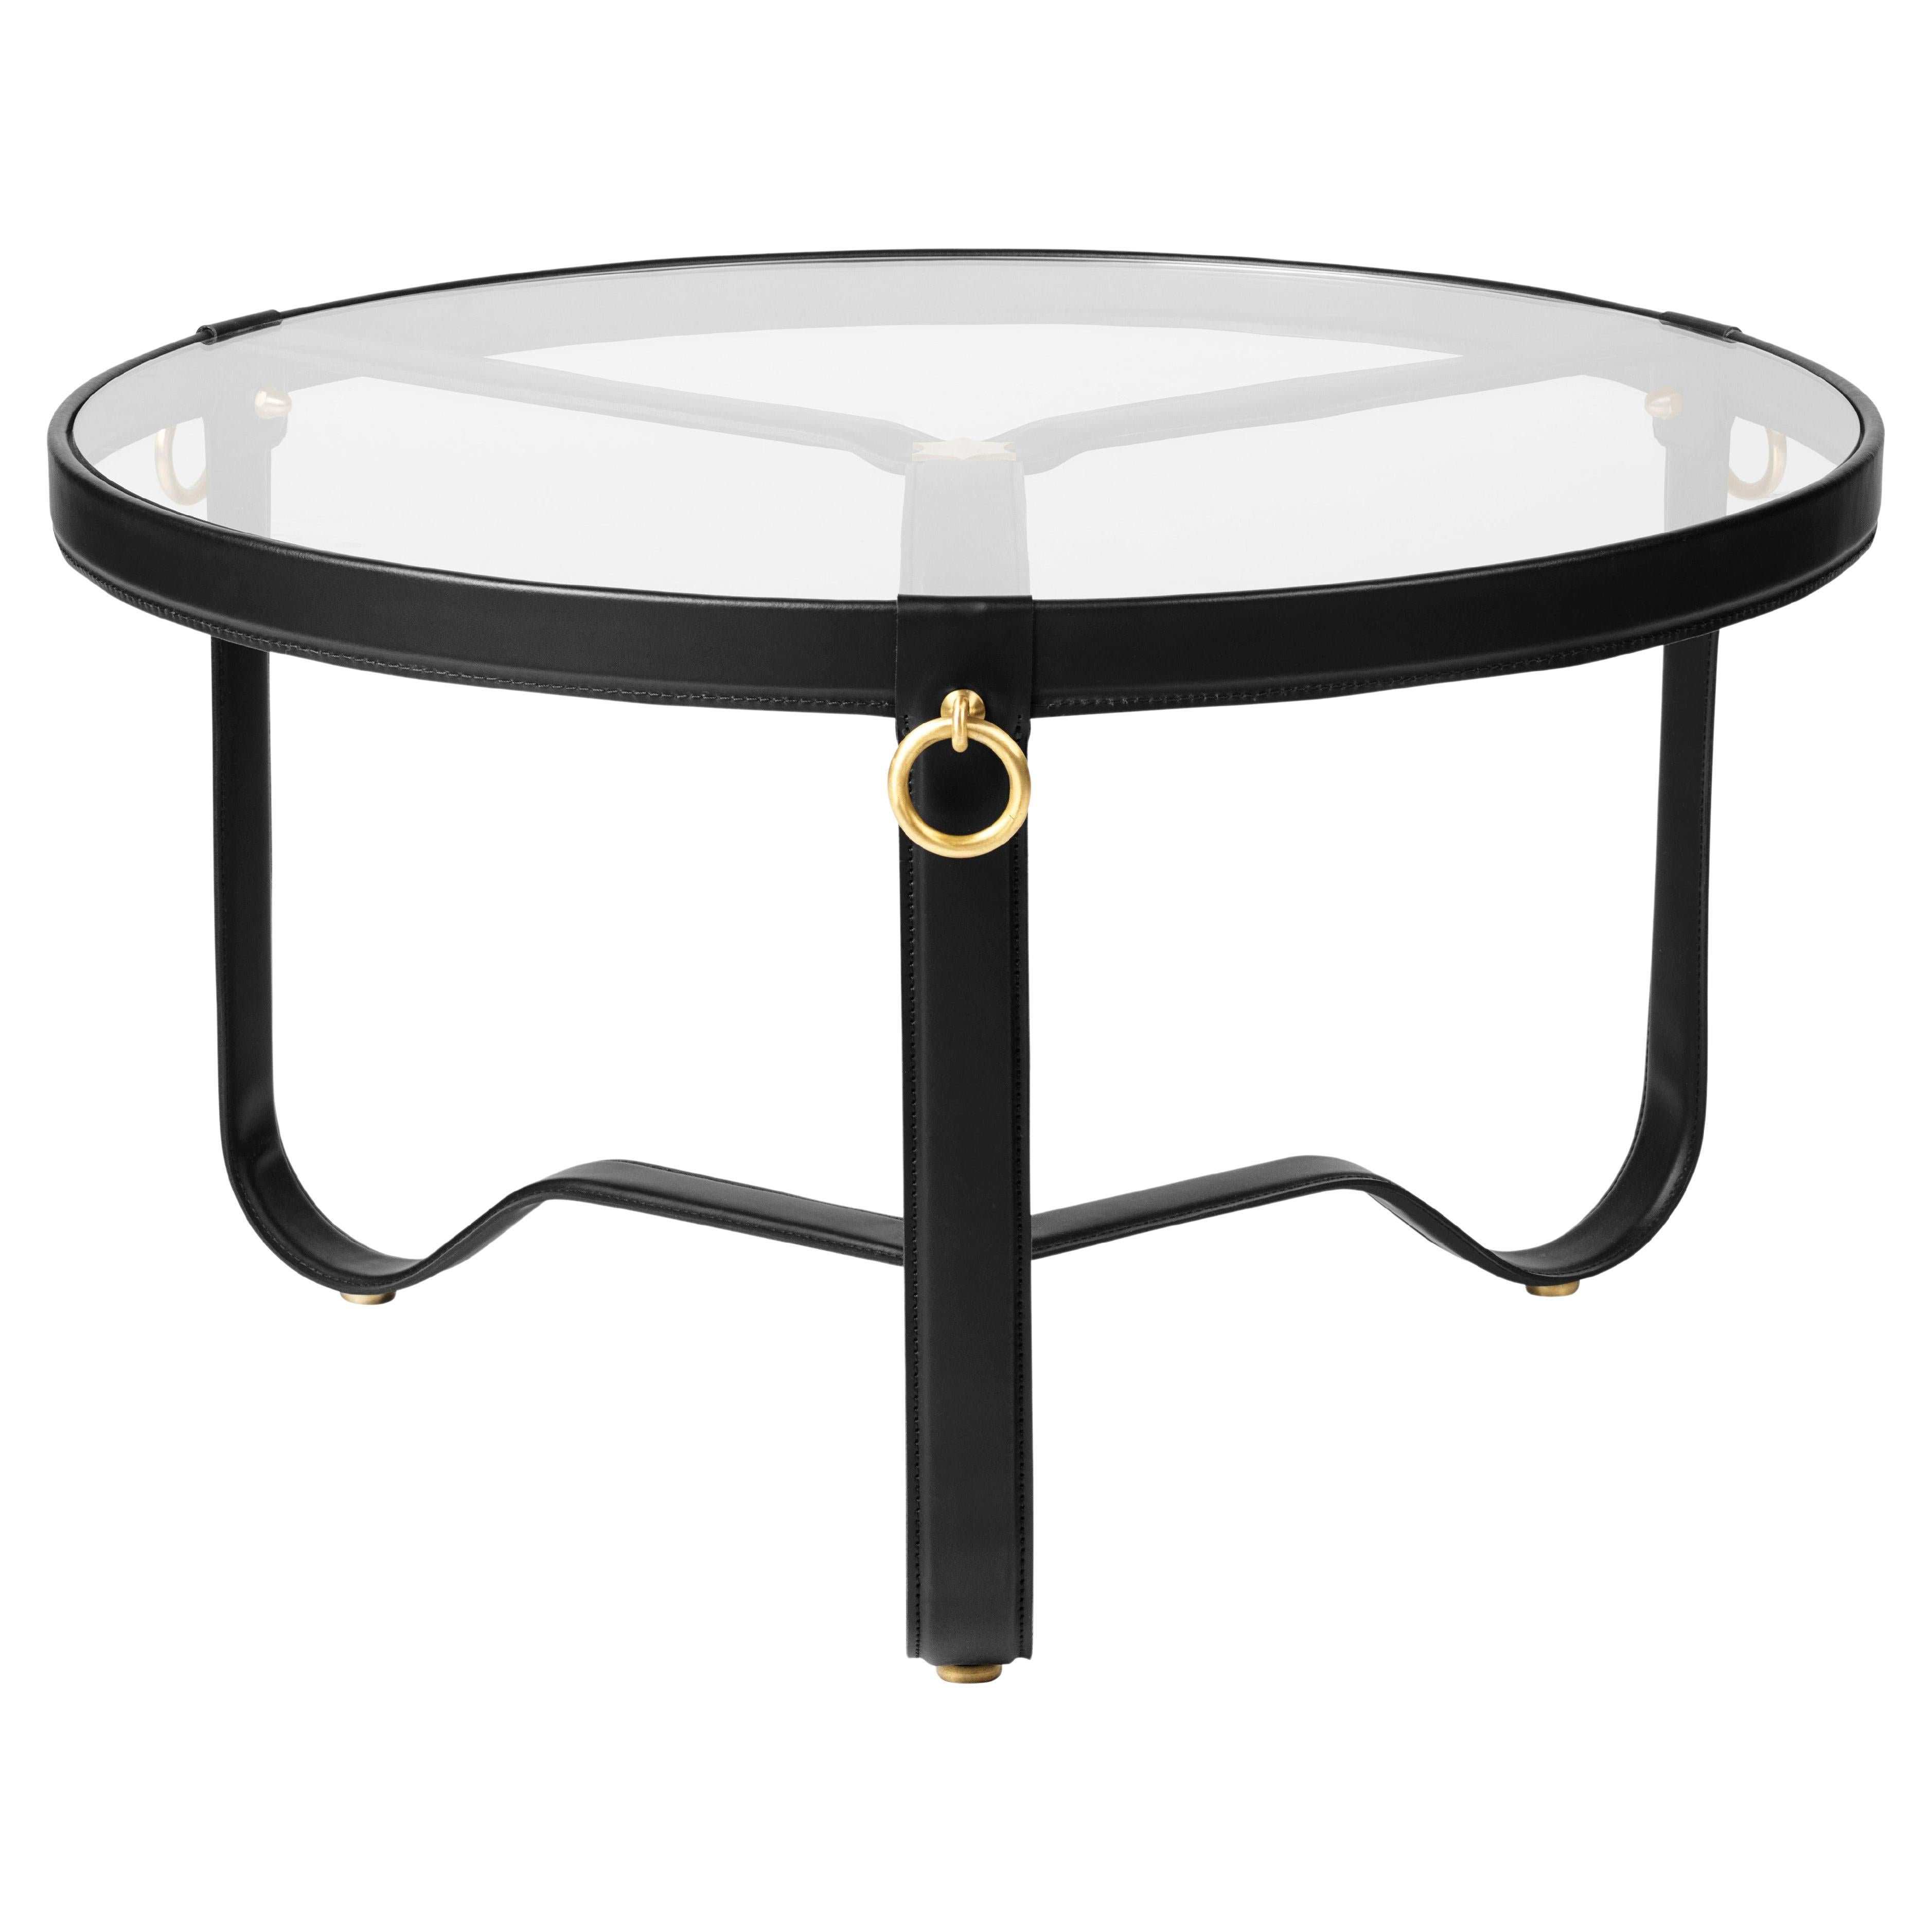 Jacques Adnet 'Circulaire' Glass and Black Leather Coffee or Side Table for GUBI For Sale